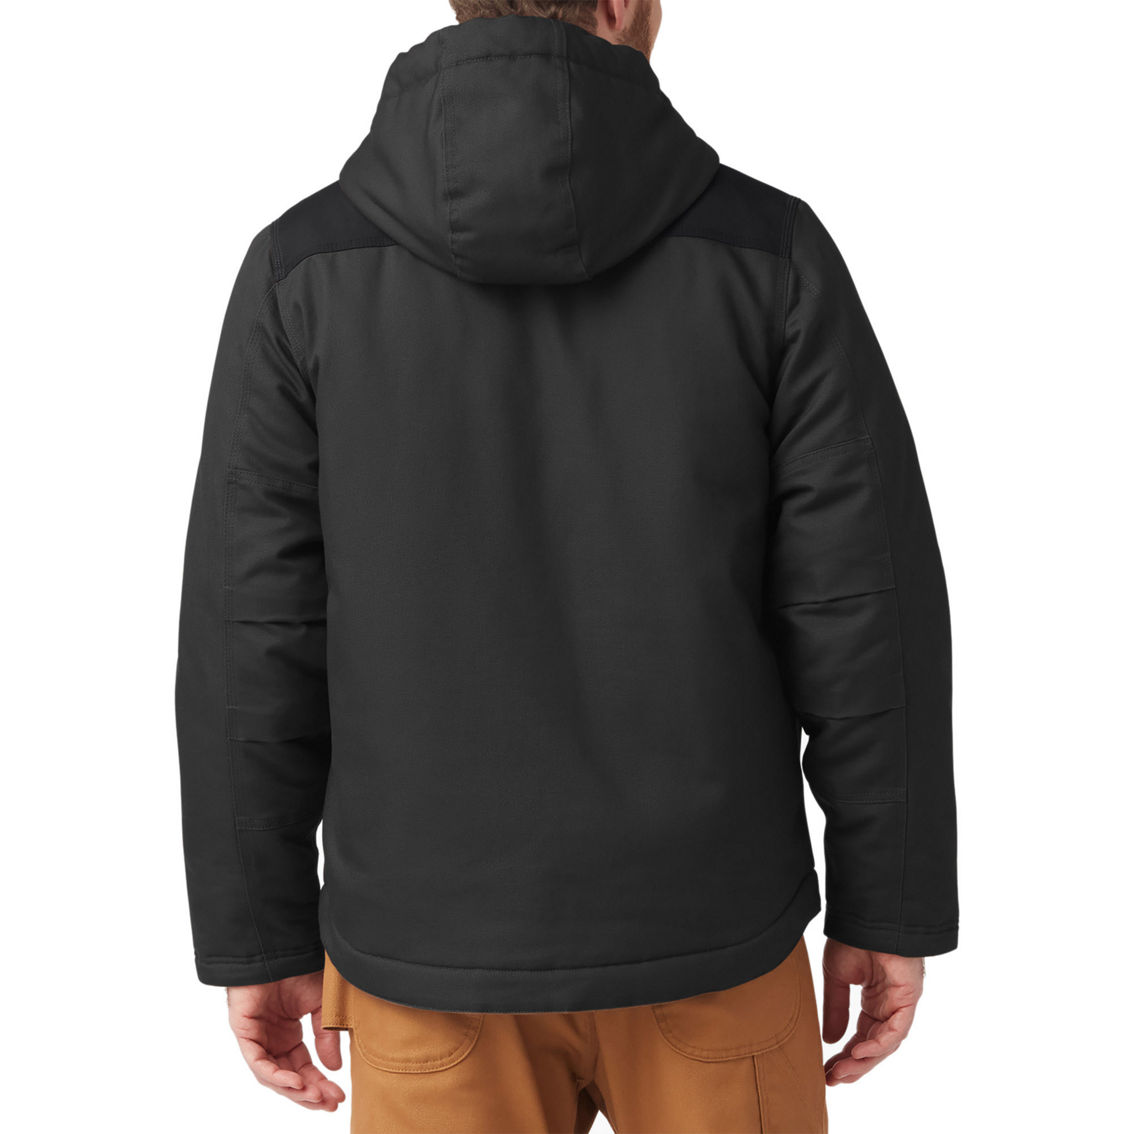 Dickies Duratech Flex Duck Jacket | Jackets | Clothing & Accessories ...